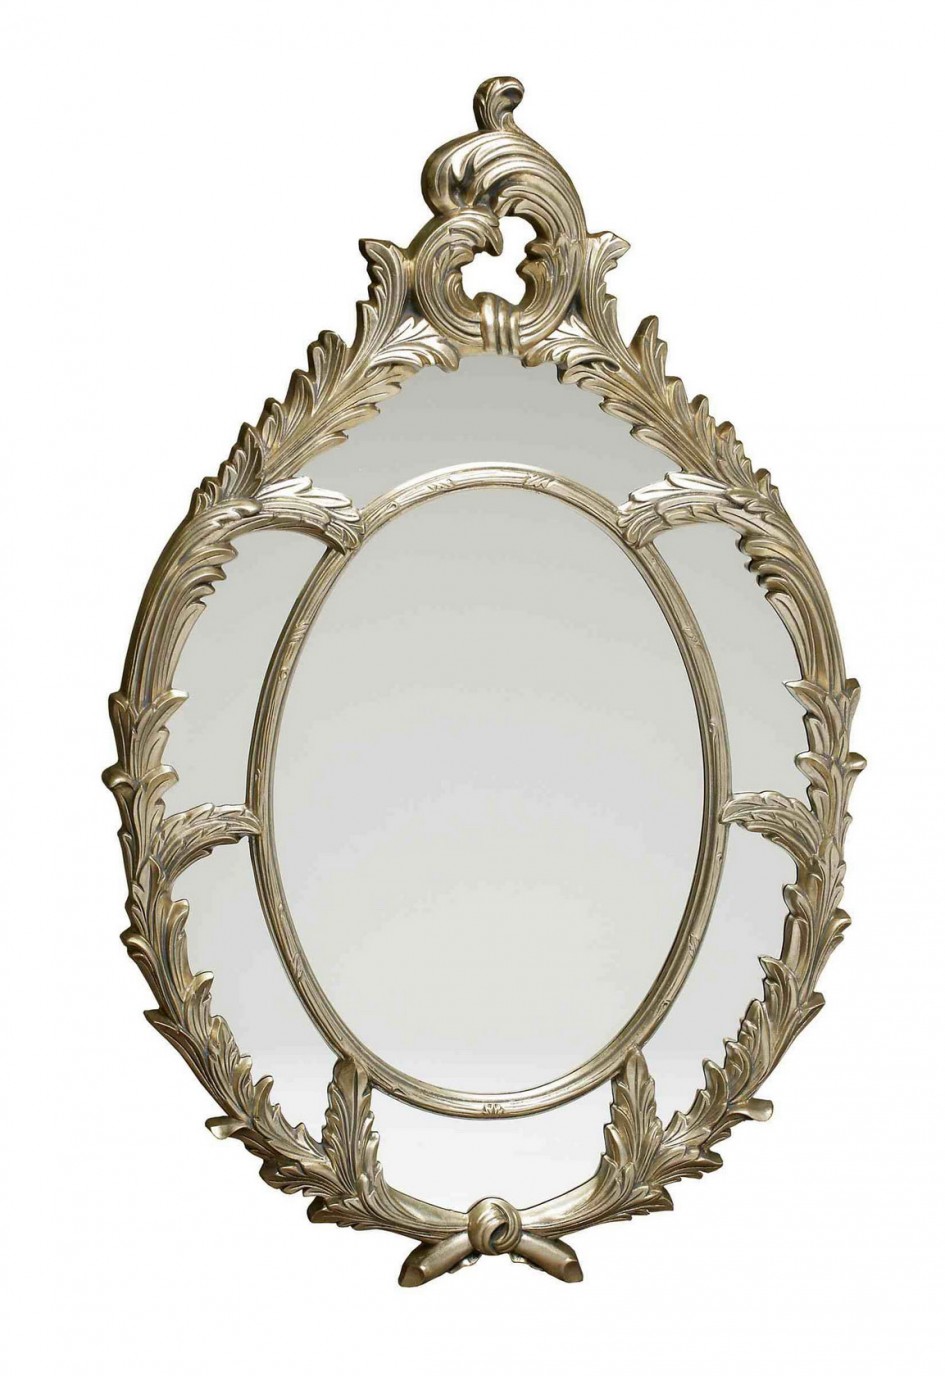 Intriguing Oval Bathroom Mirror Designed In Very Good Shape With Many Unique Carvings In The Whole Side Of The Frame Bathroom